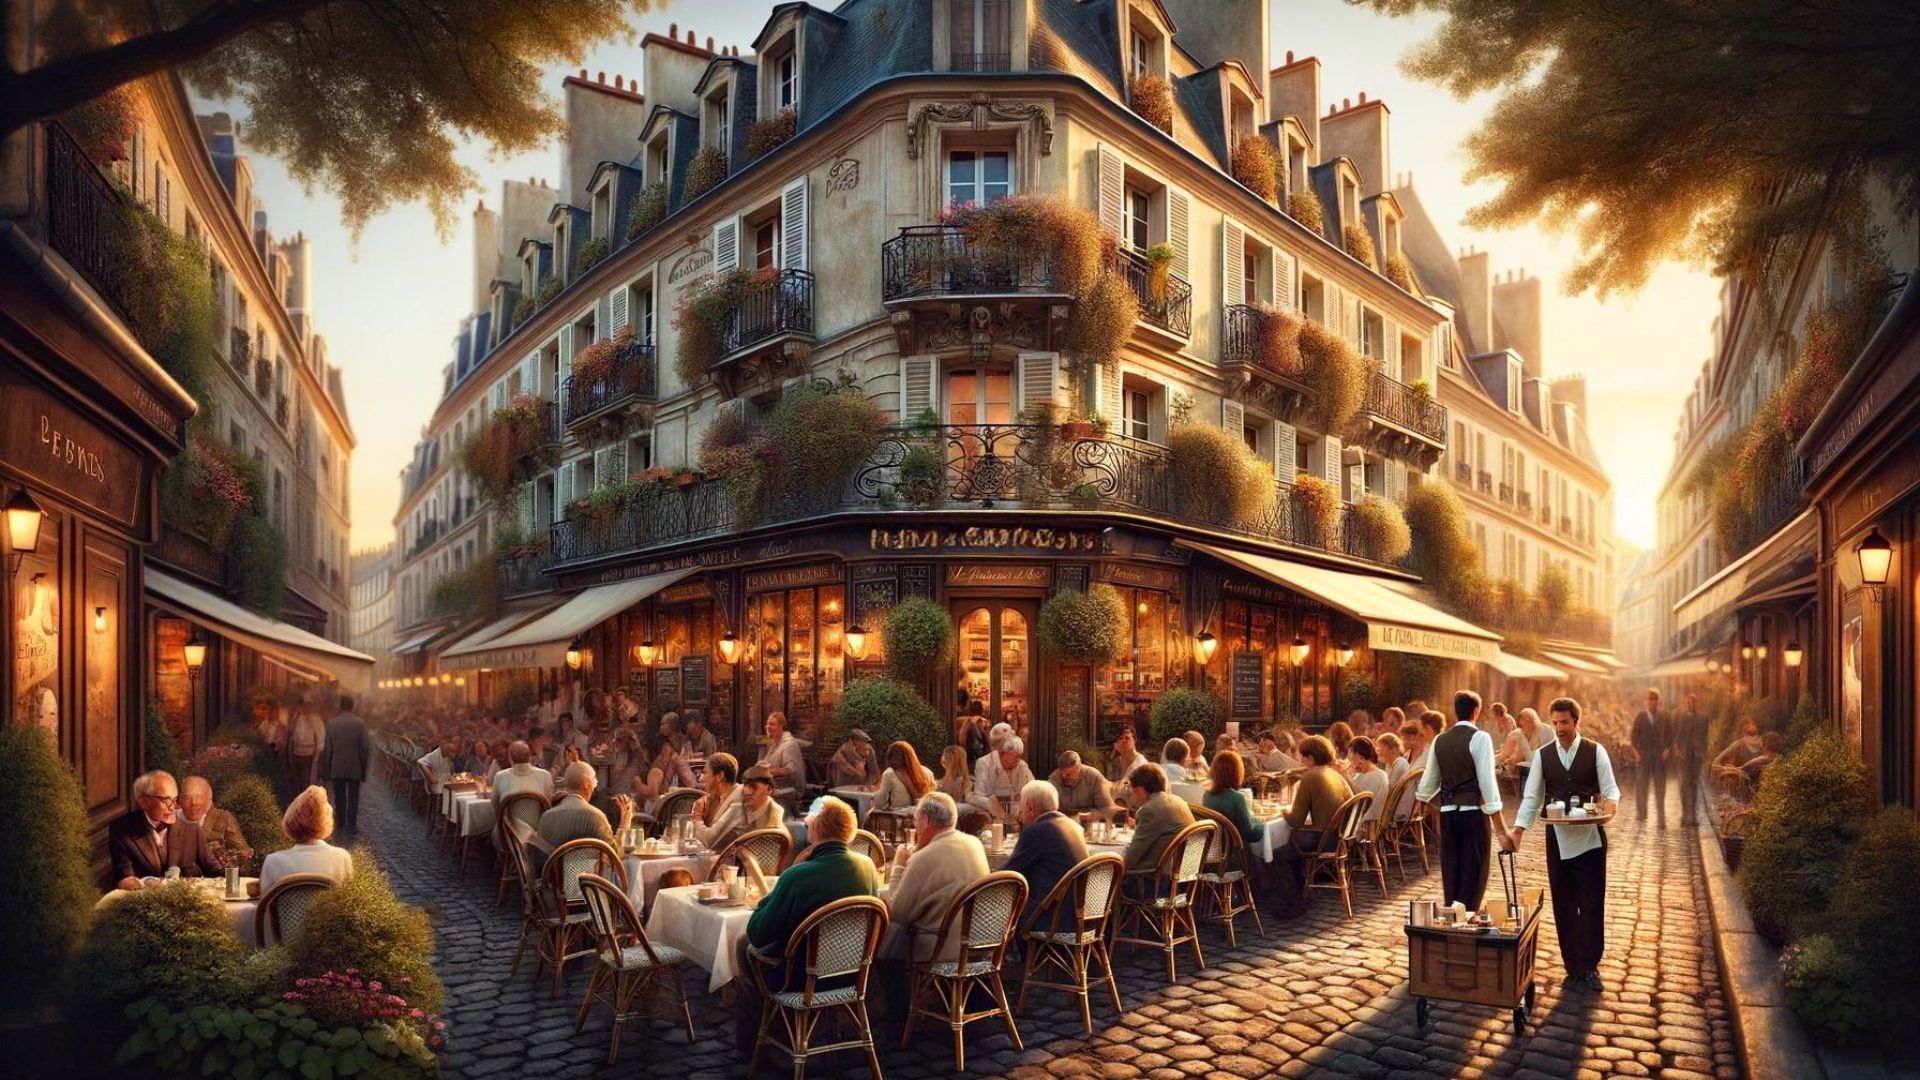 France_ The Significance of the French Café Culture